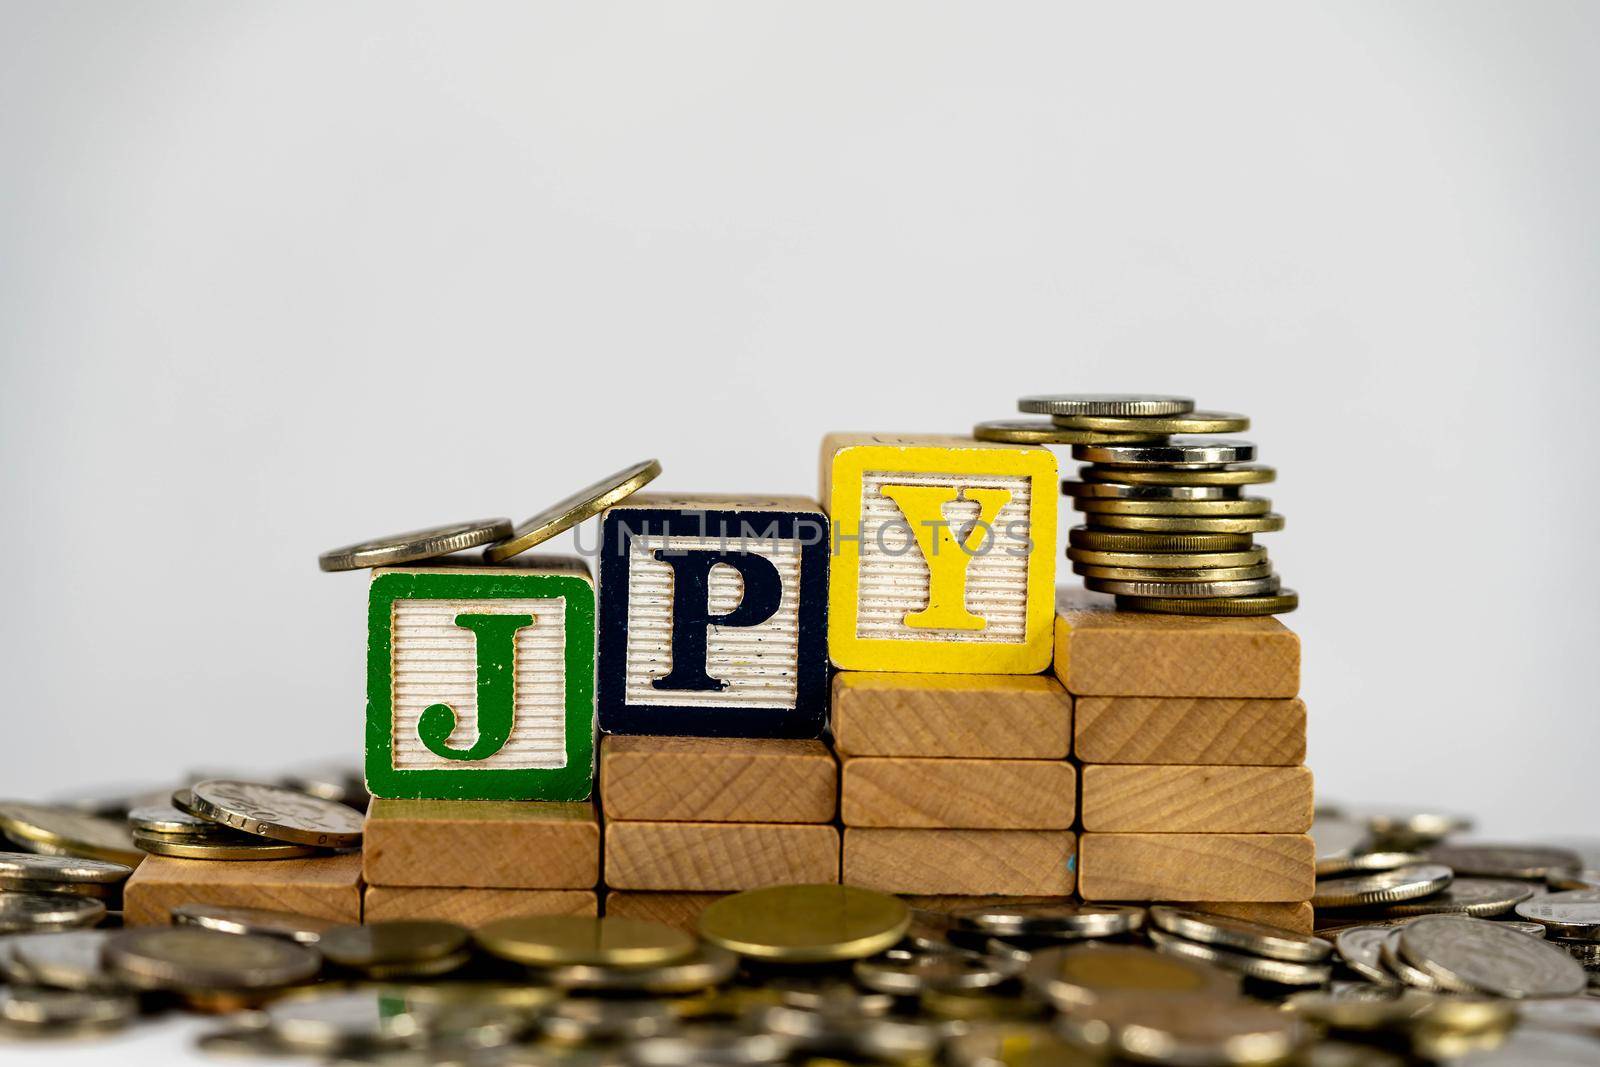 Forex JPY concept with wooden blocks and coins. Forx JPY letters on wooden blocks sorrounded with money by billroque